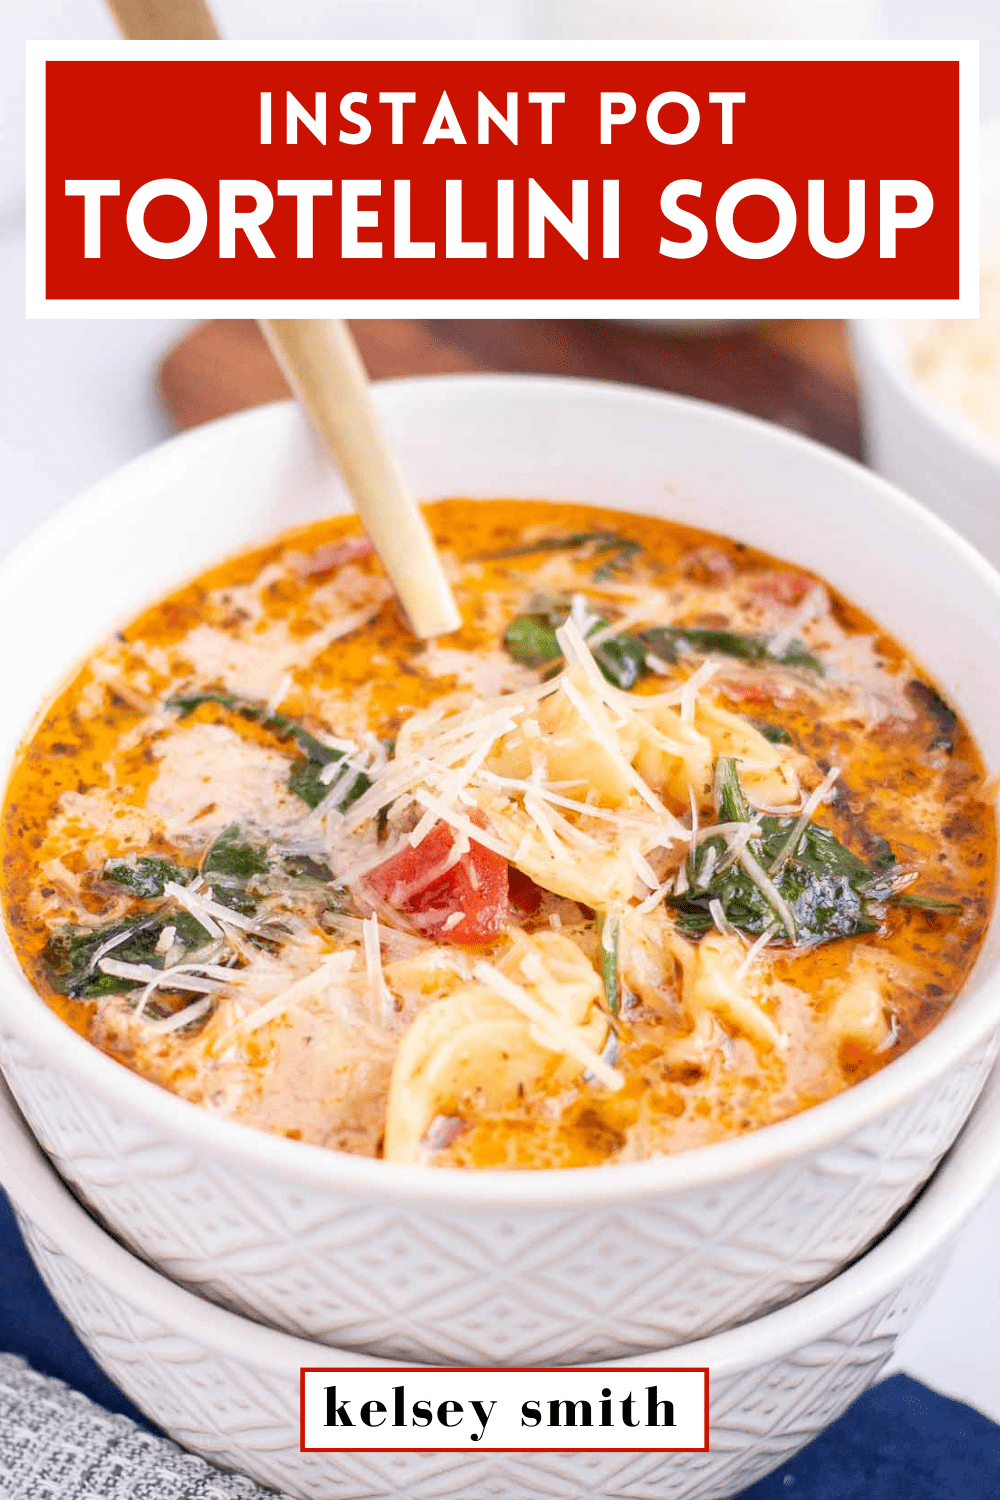 Top down view of Instant Pot tortellini soup with cheese tortellini, wilted fresh baby spinach, diced tomatoes, and a creamy broth in a bowl. Garnished with shredded parmesan.